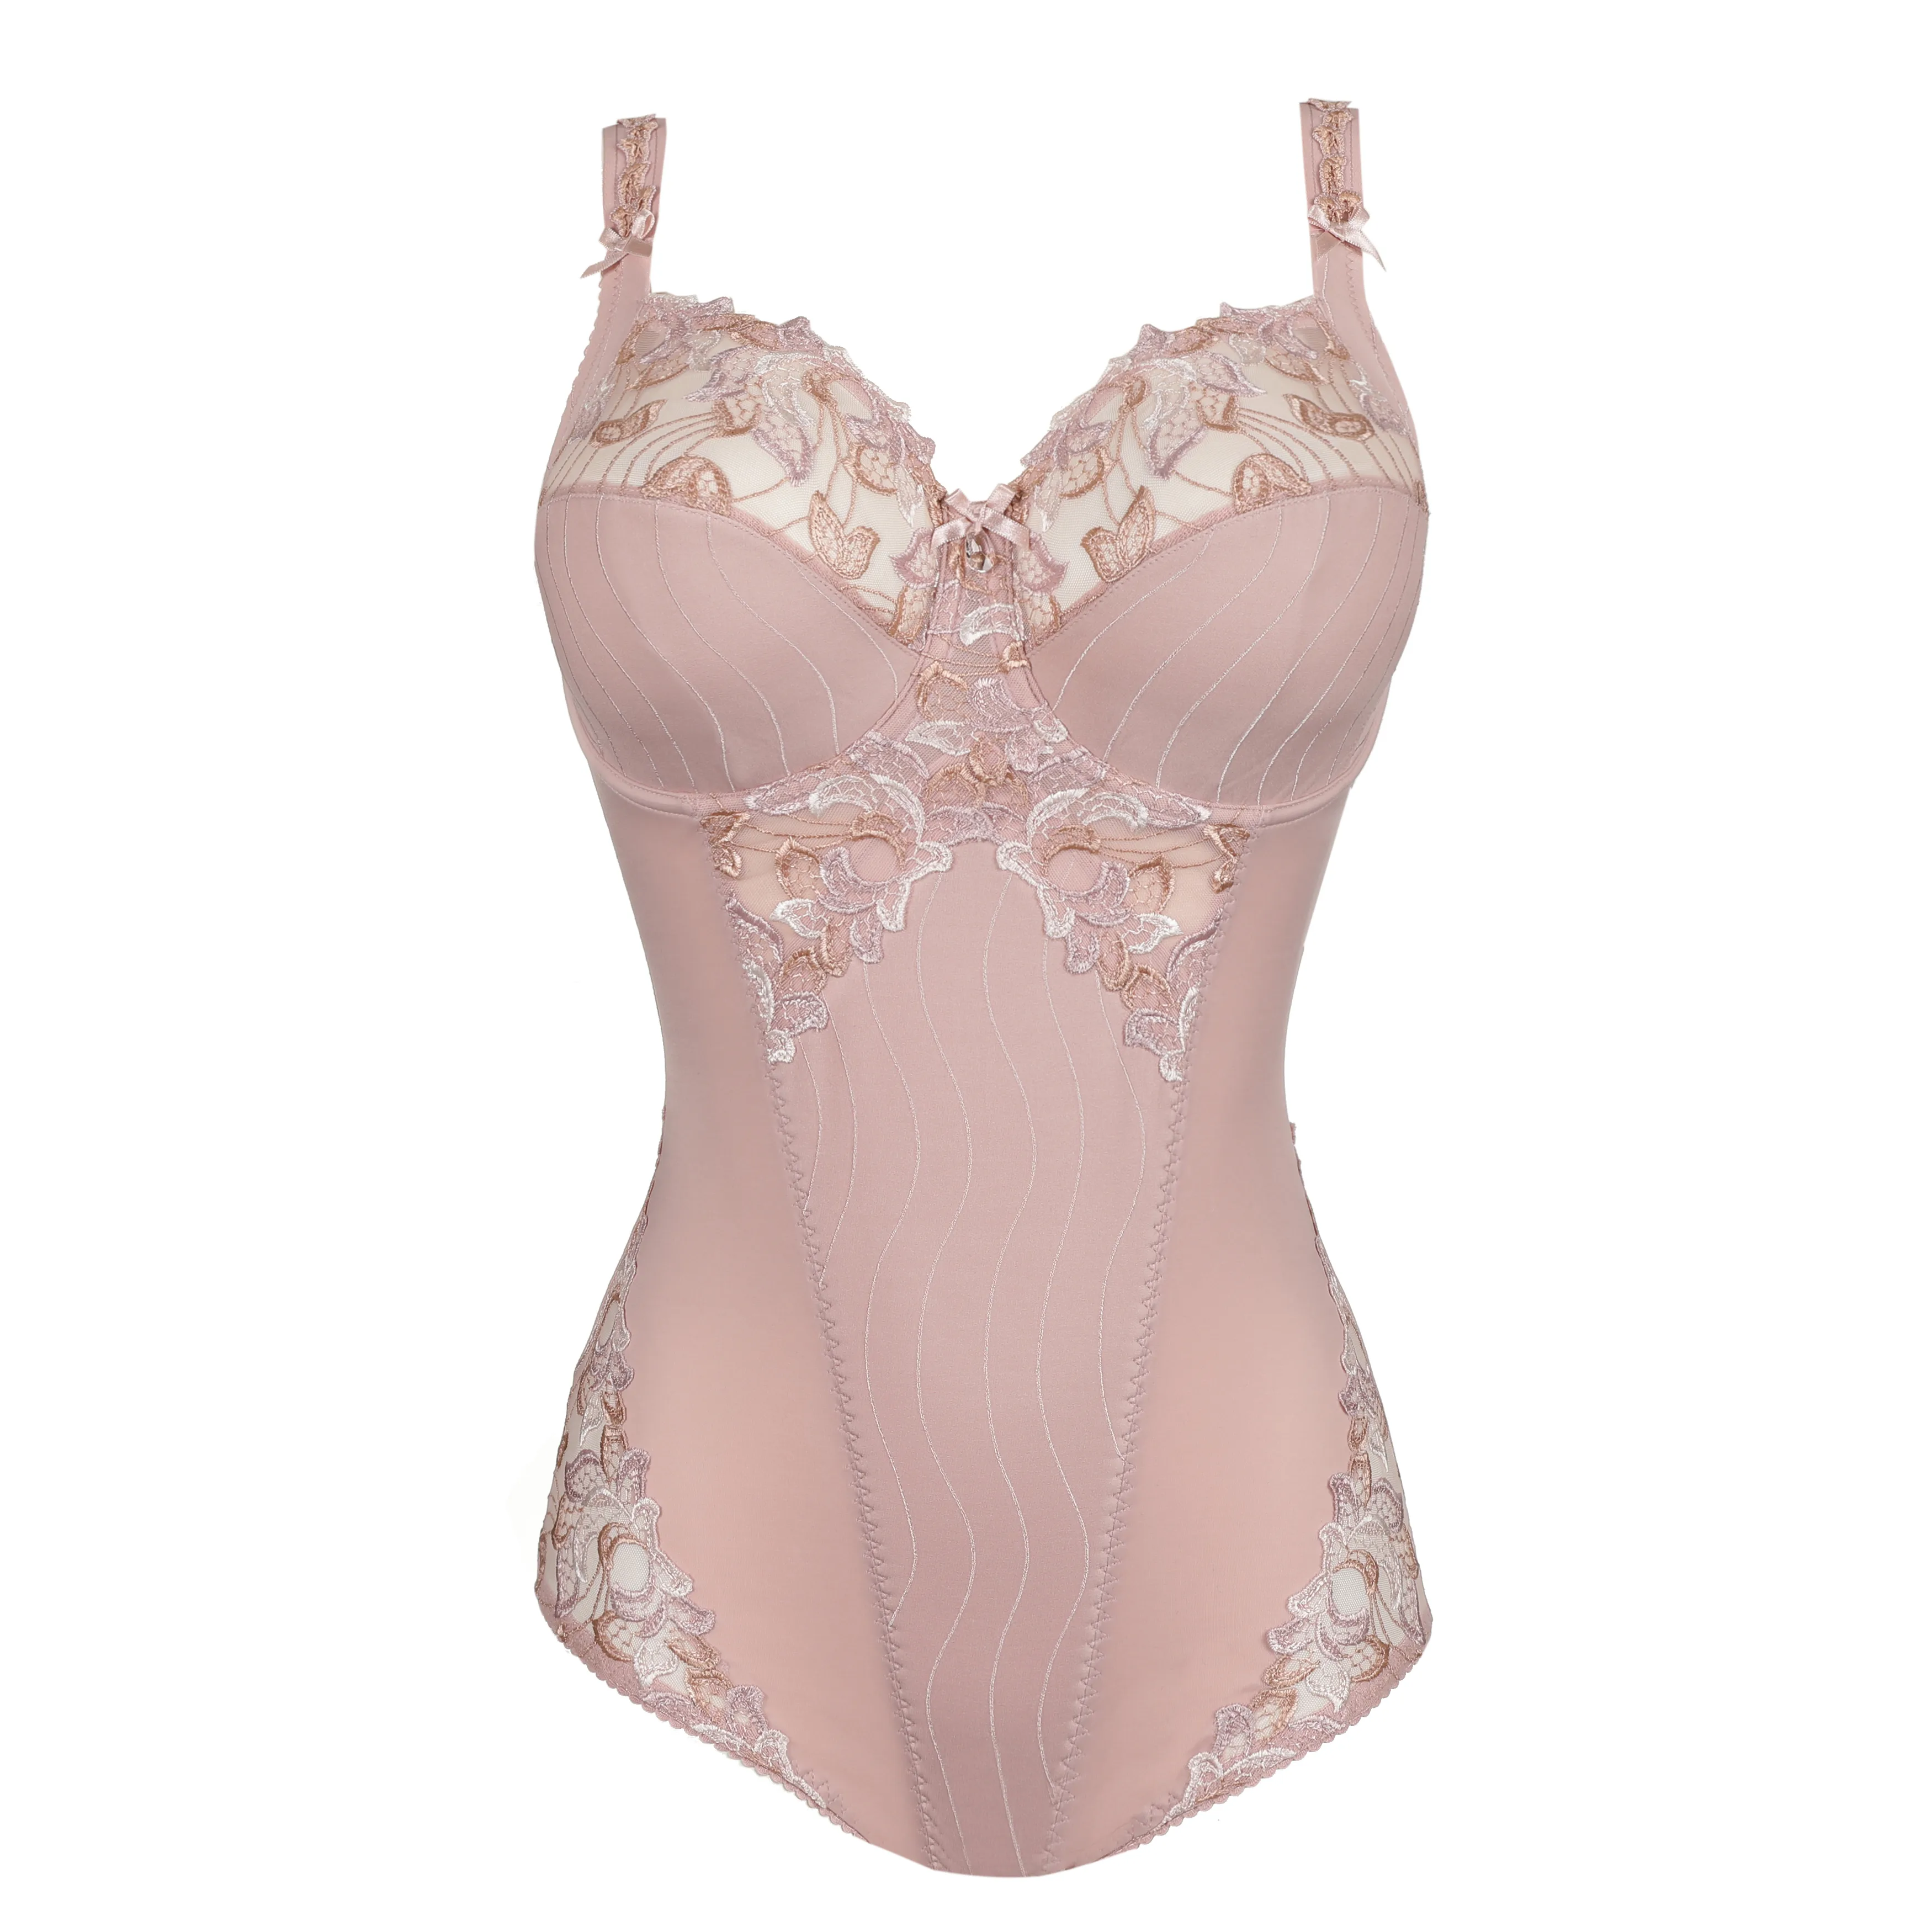 Prima Donna Deauville Full Cup Bra - Vintage Pink (Limited Edition) – Lily  Pad Lingerie